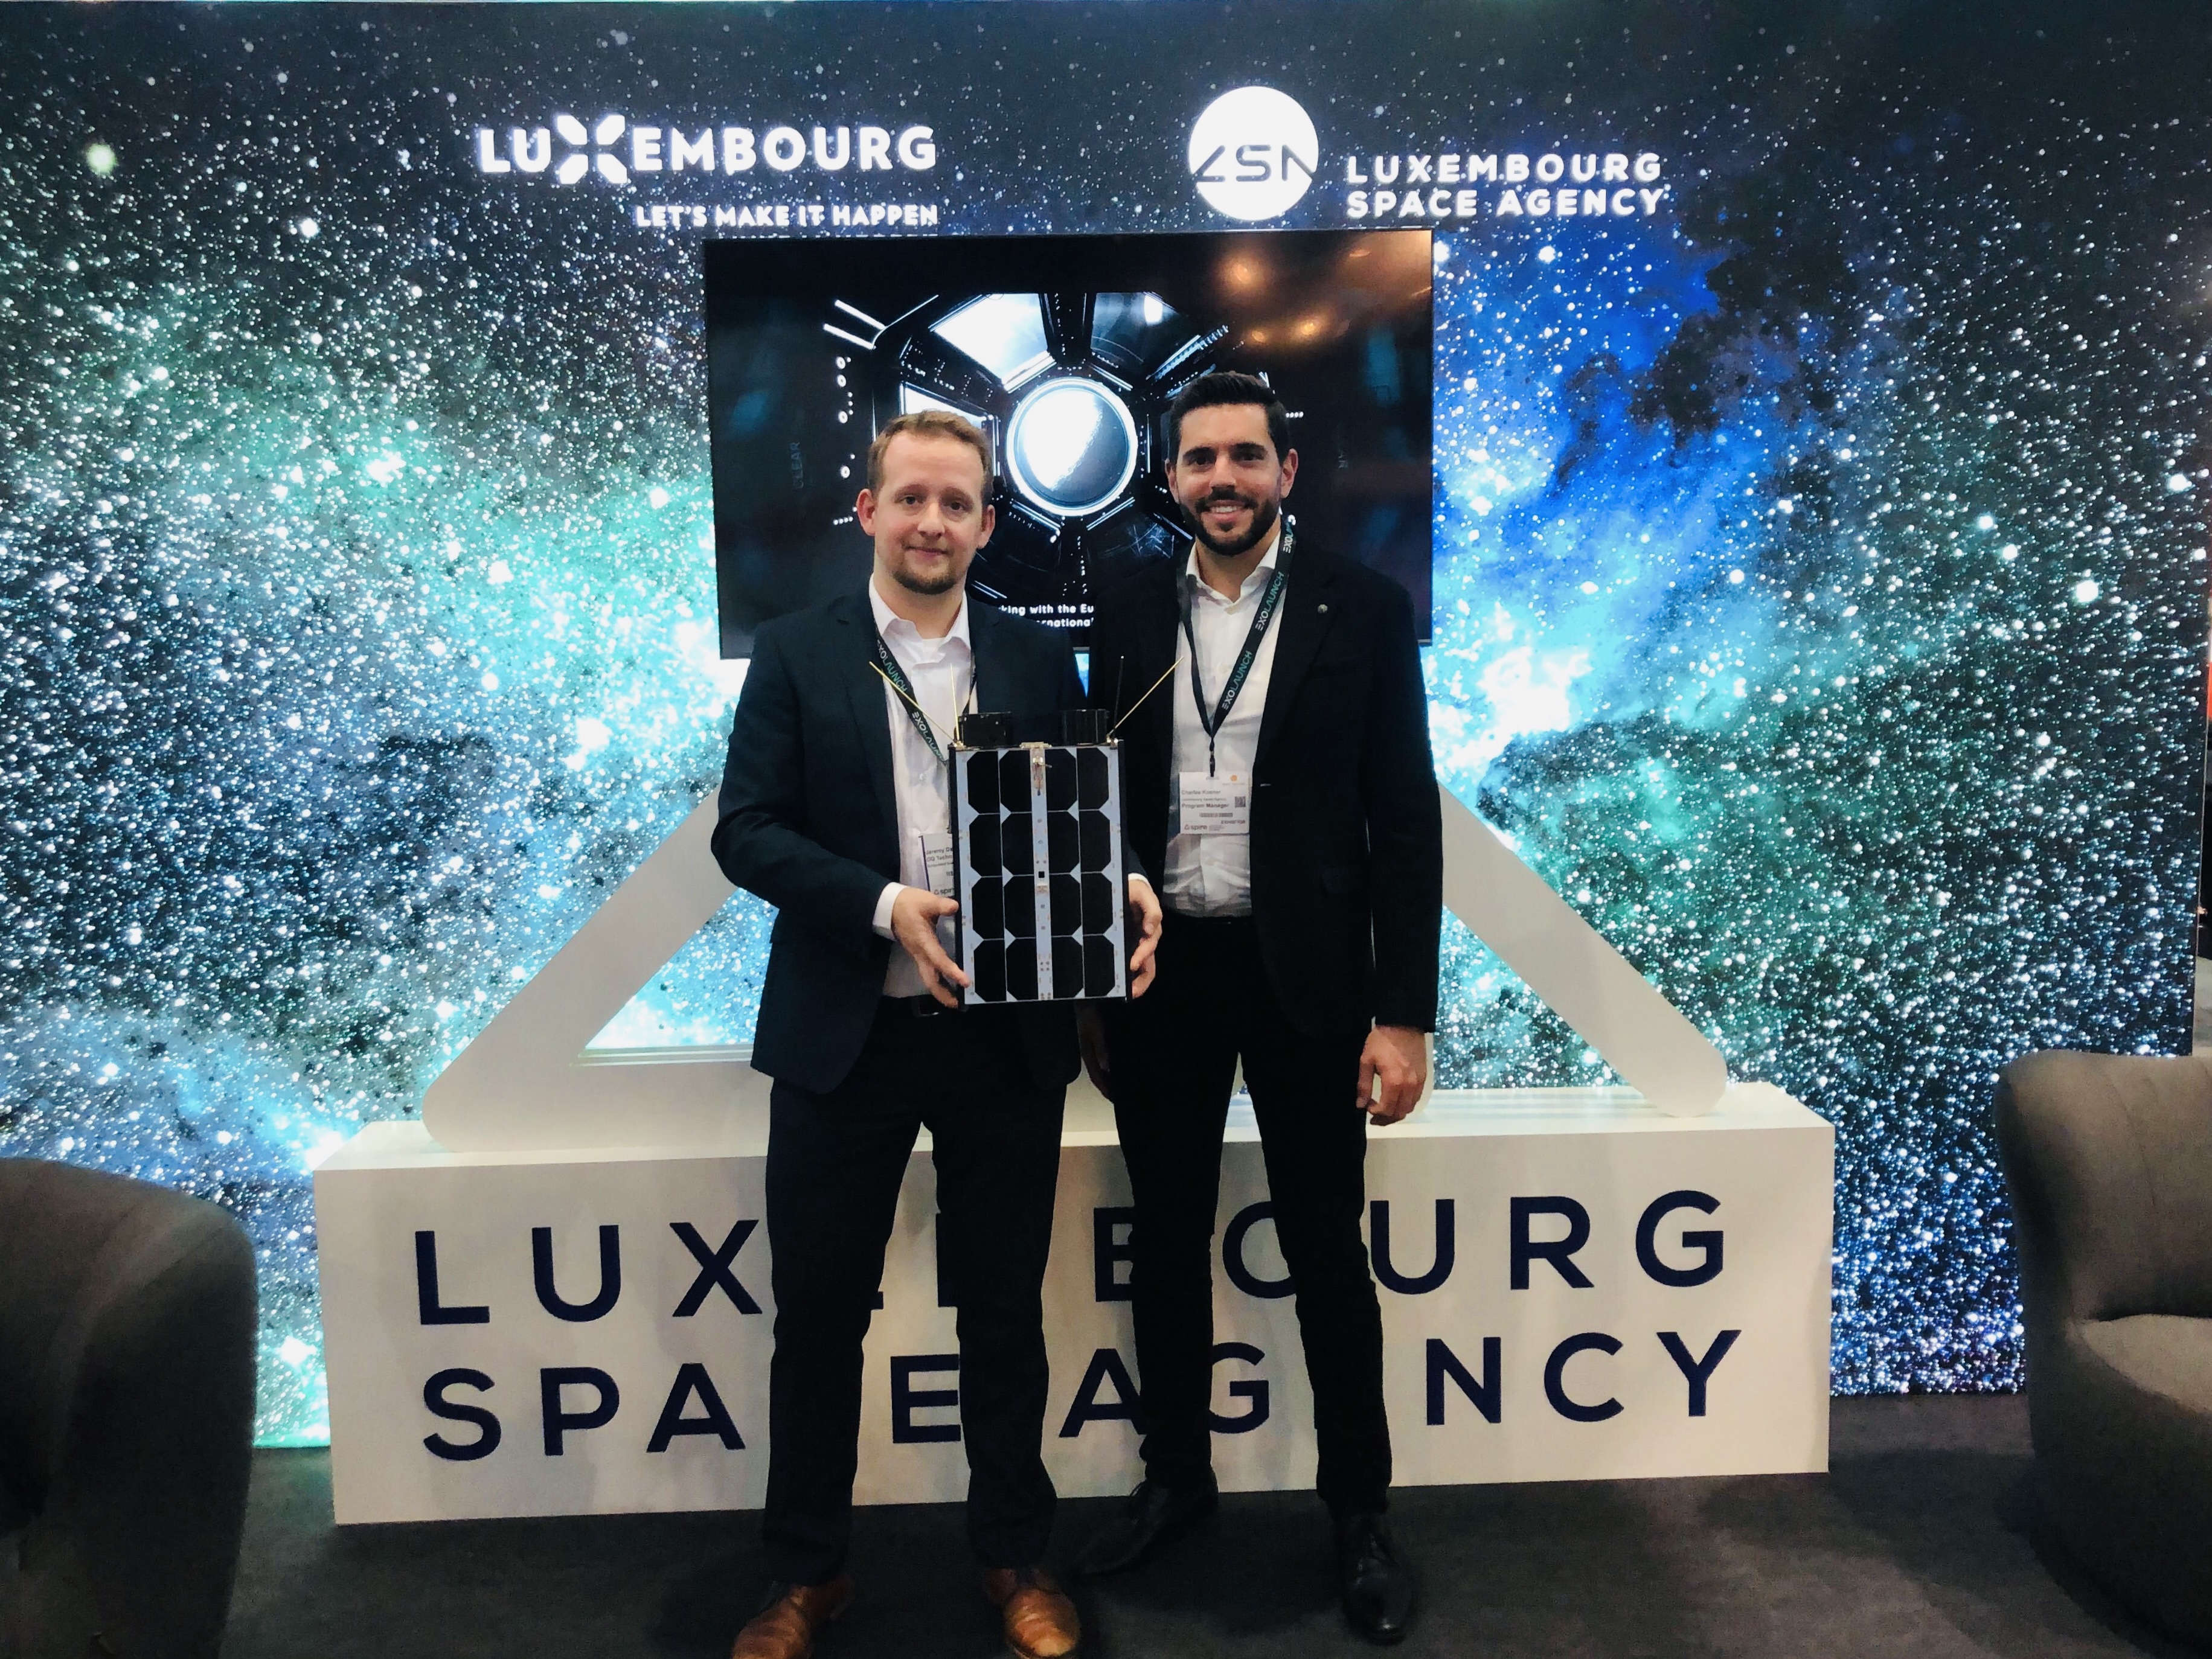 Jeremy Dracis (OQ Technology) & Charles Koener (Luxembourg Space Agency) with MACSAT model at the Space Tech Europe event in Bremen